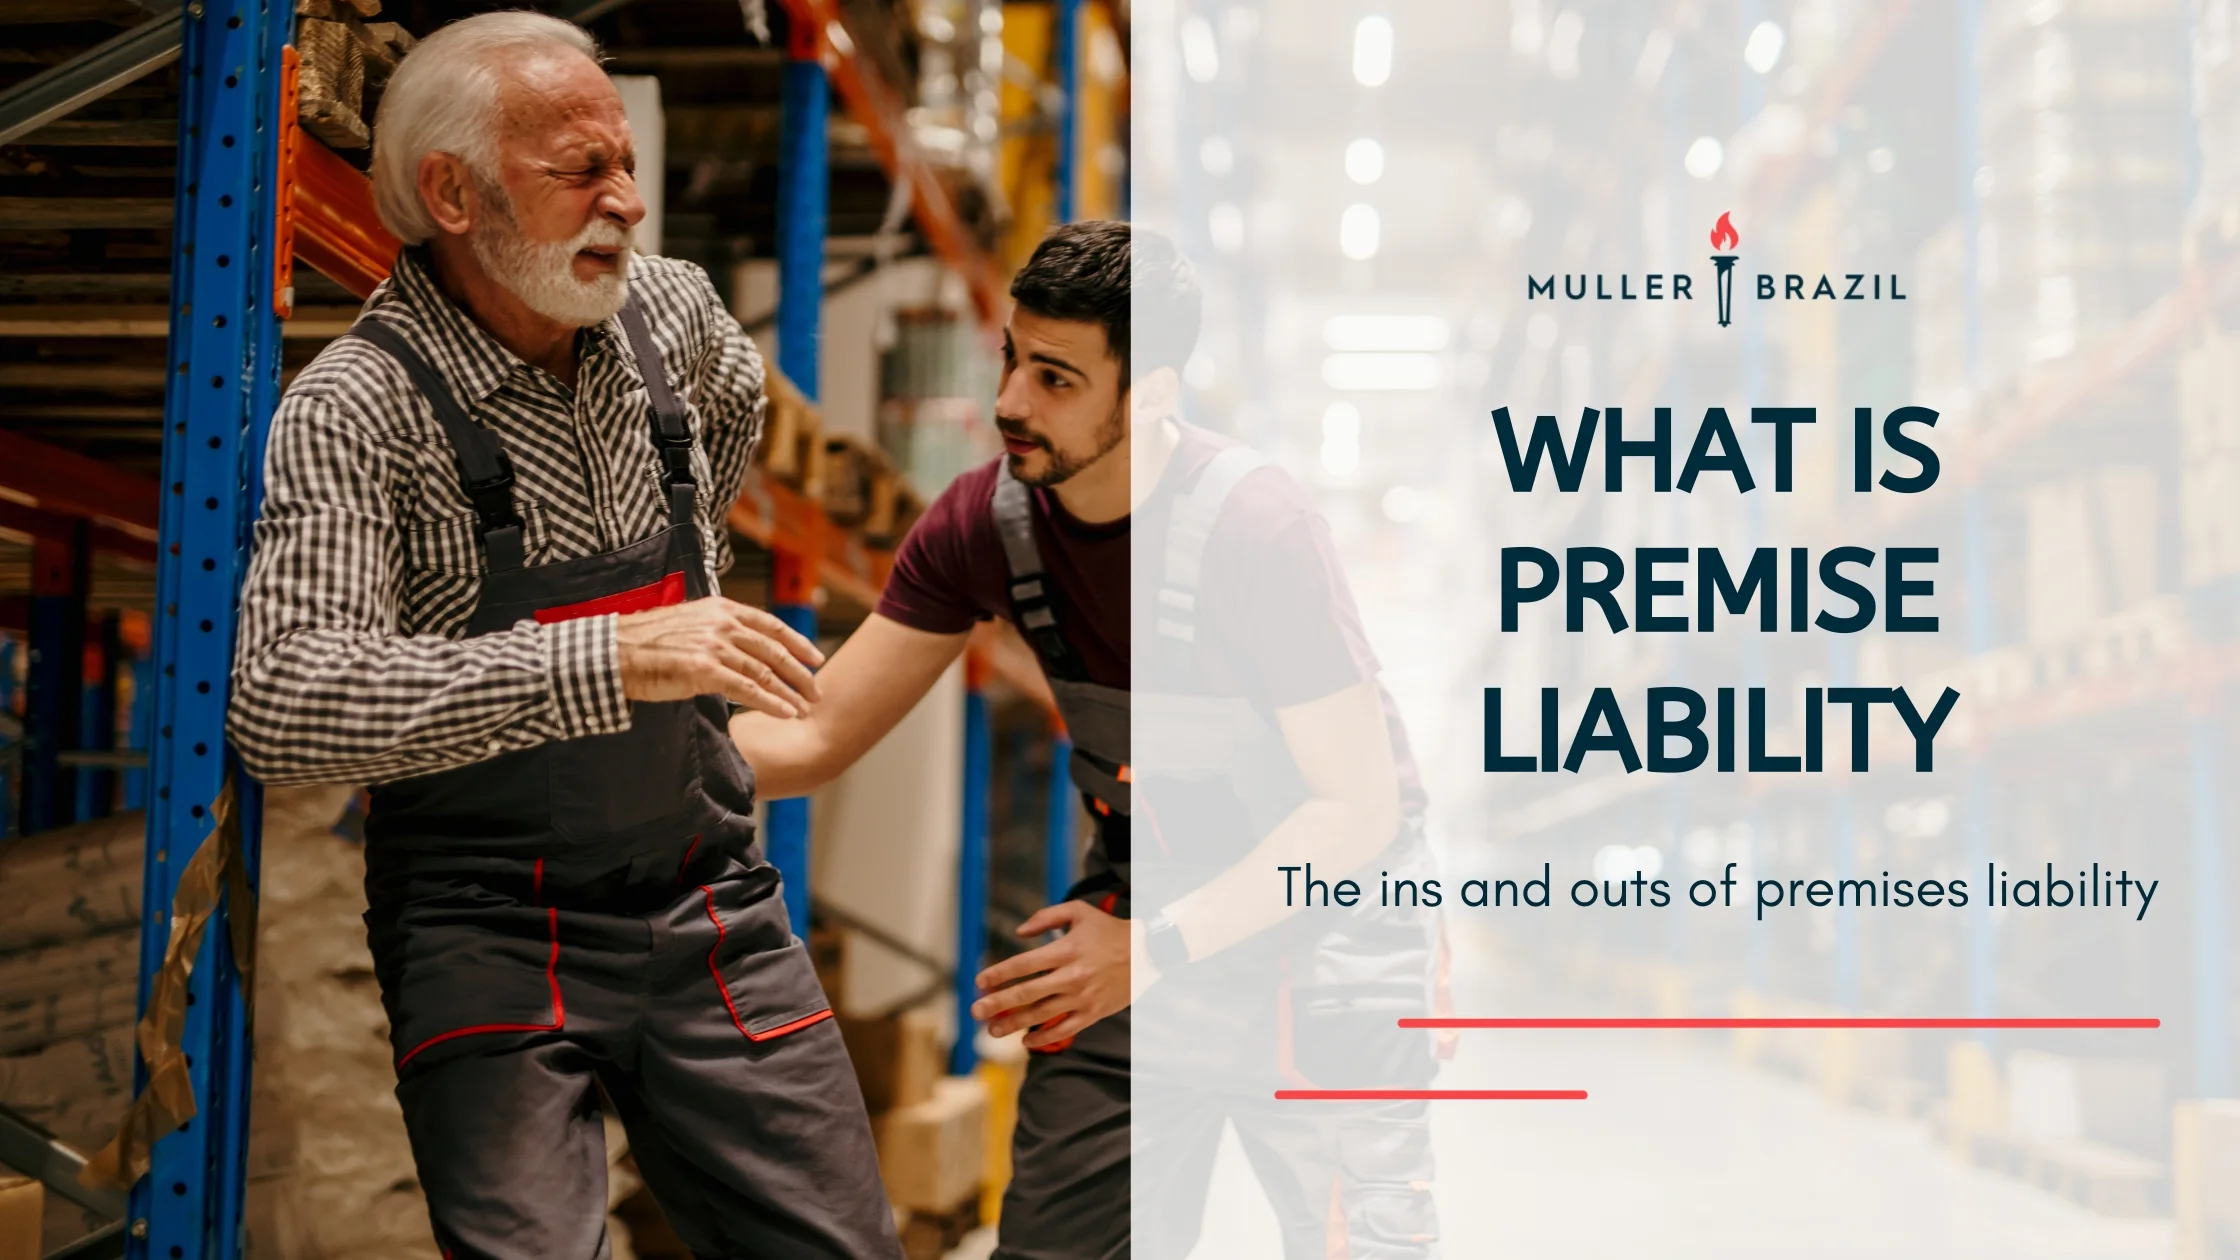 Blog featured image of a man falling and a boy catching him in a warehouse and a caption that says “What is Premise Liability